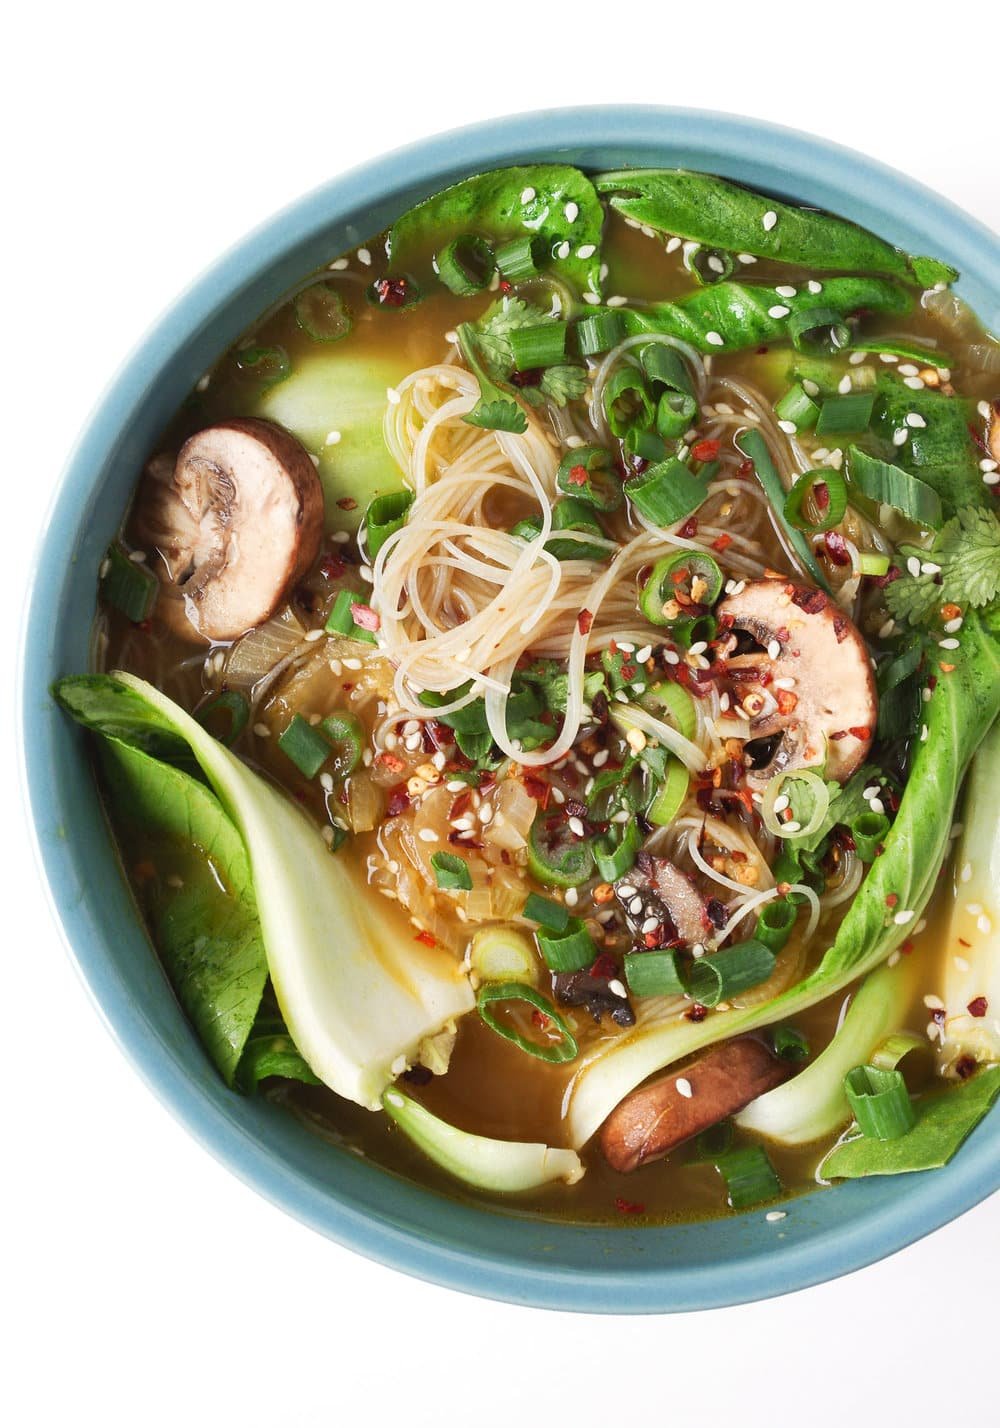 Most popular recipe posts from The Forked Spoon in 2017-Ginger Garlic Noodle Soup with Bok Choy